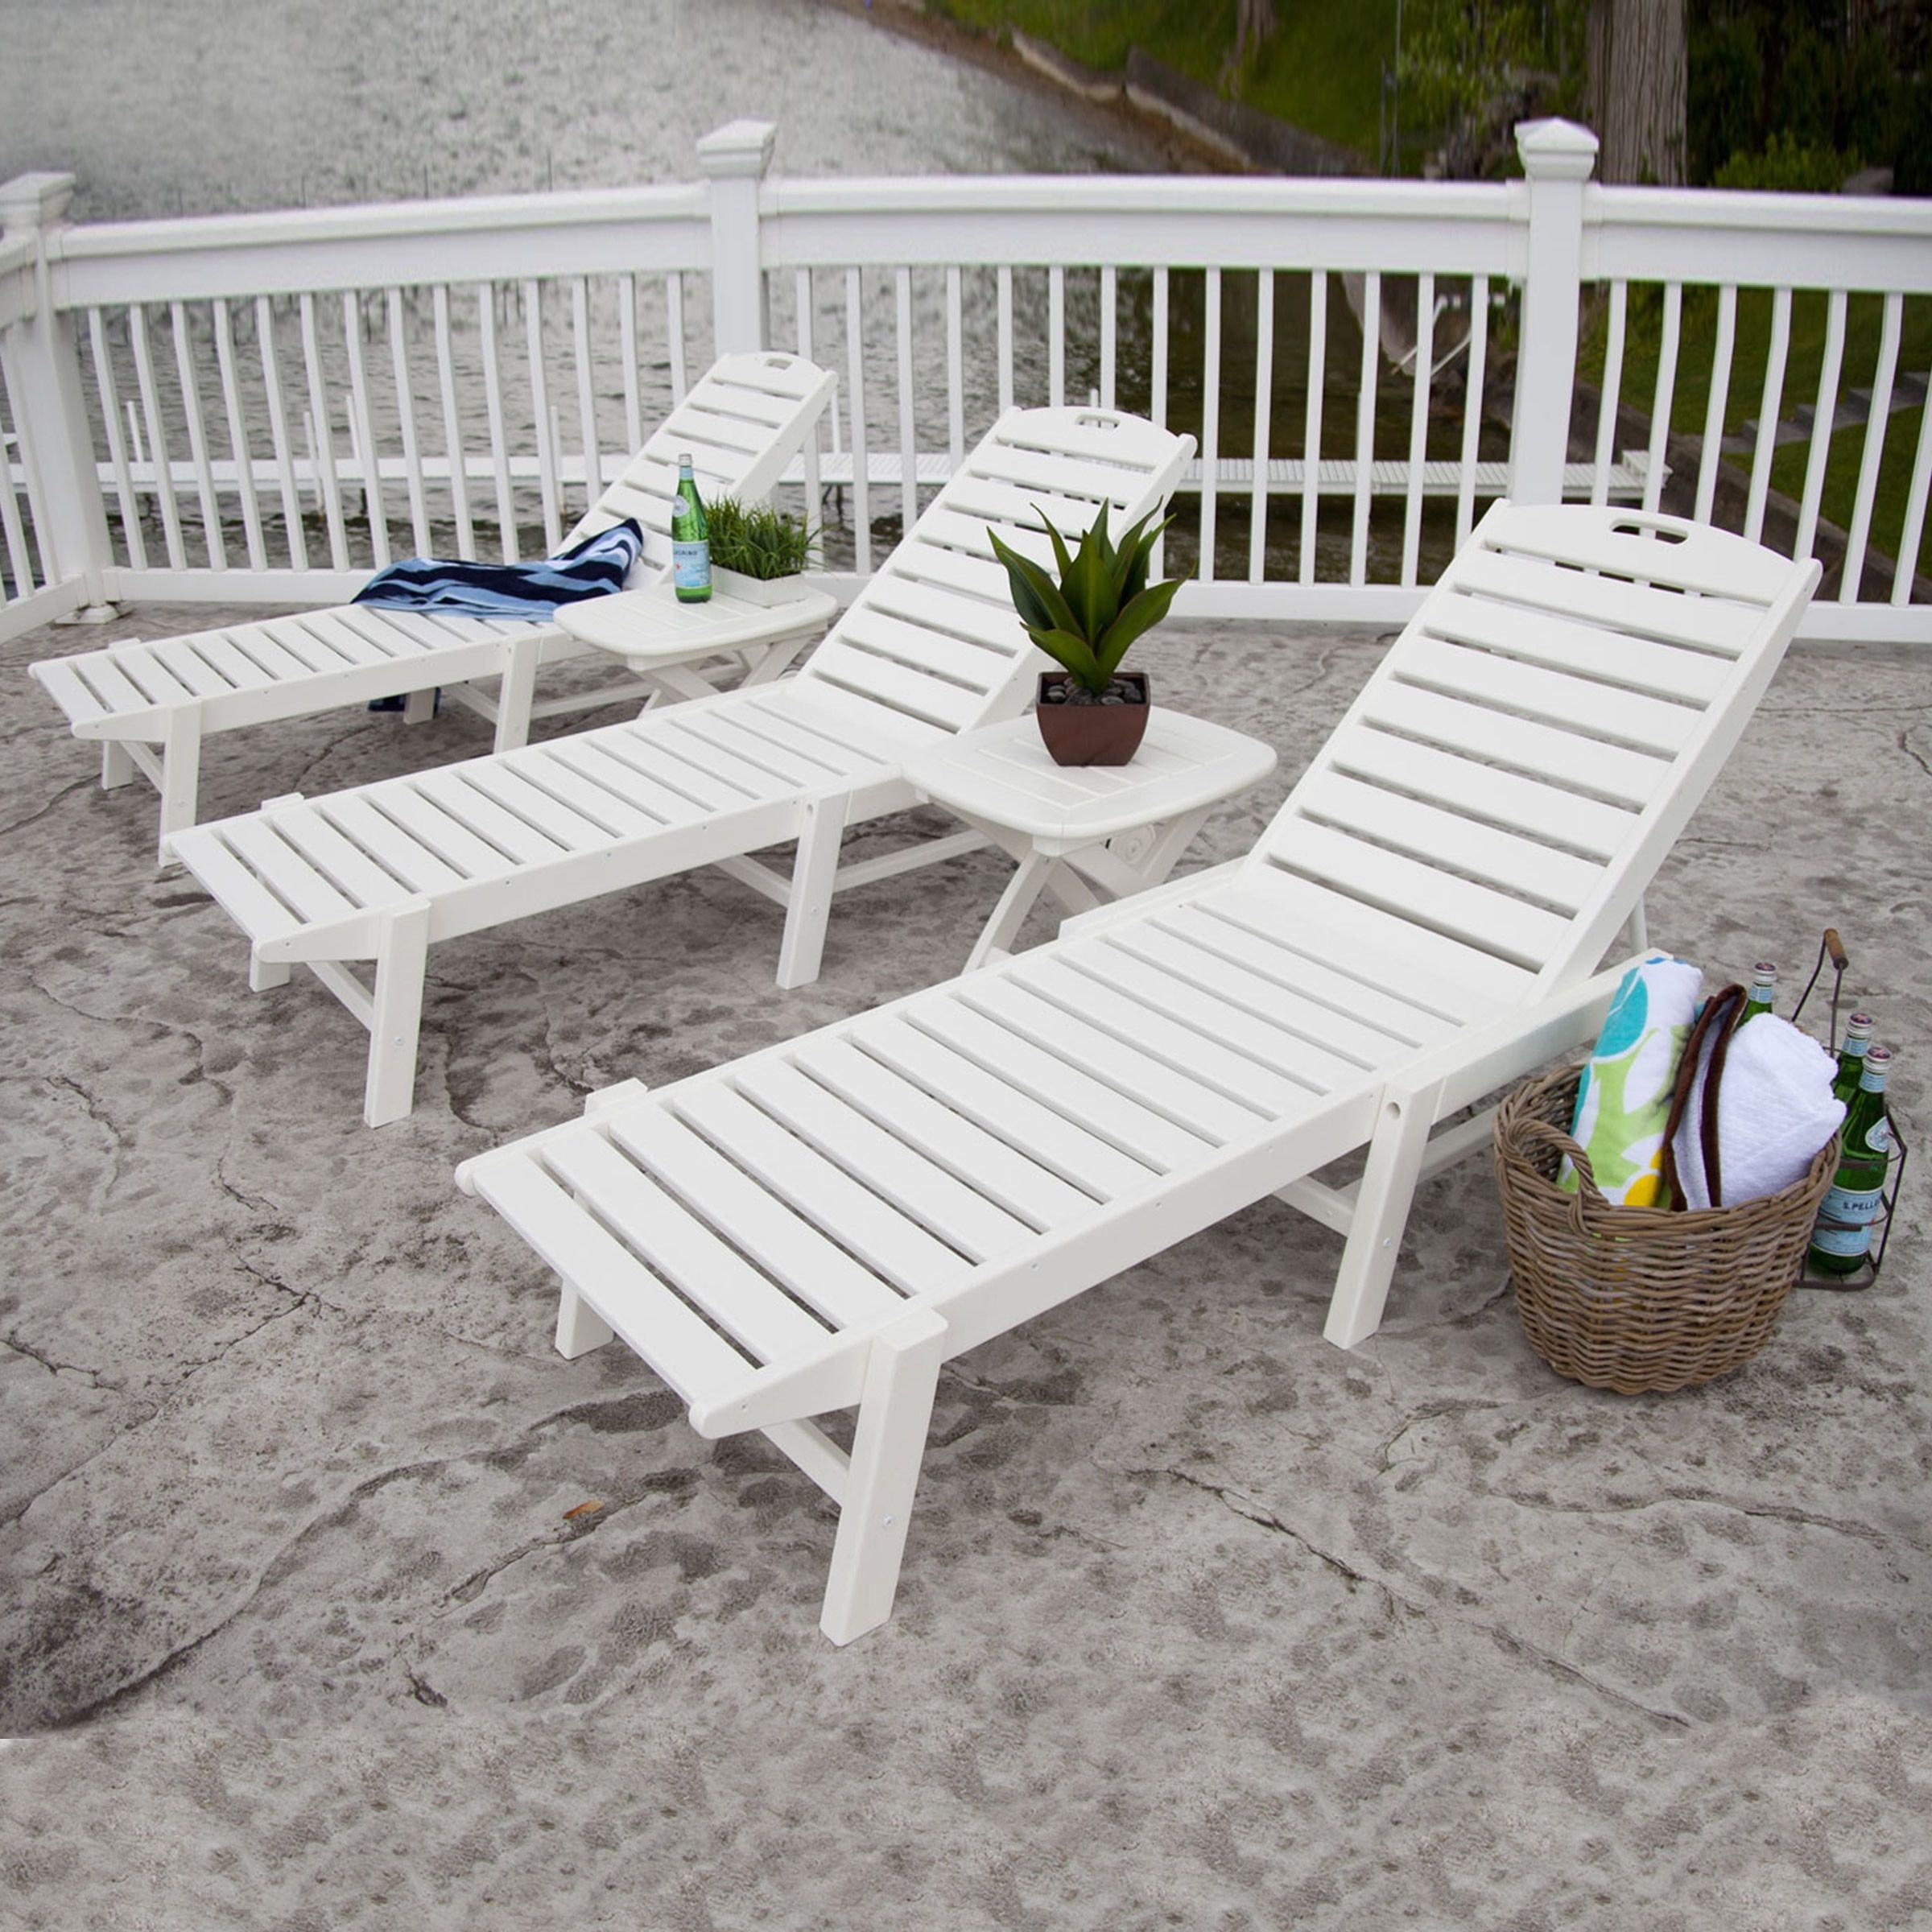 Chaise Lounge Sets Regarding Most Current Polywood Nautical Wheeled Chaise Lounge Set (View 10 of 15)